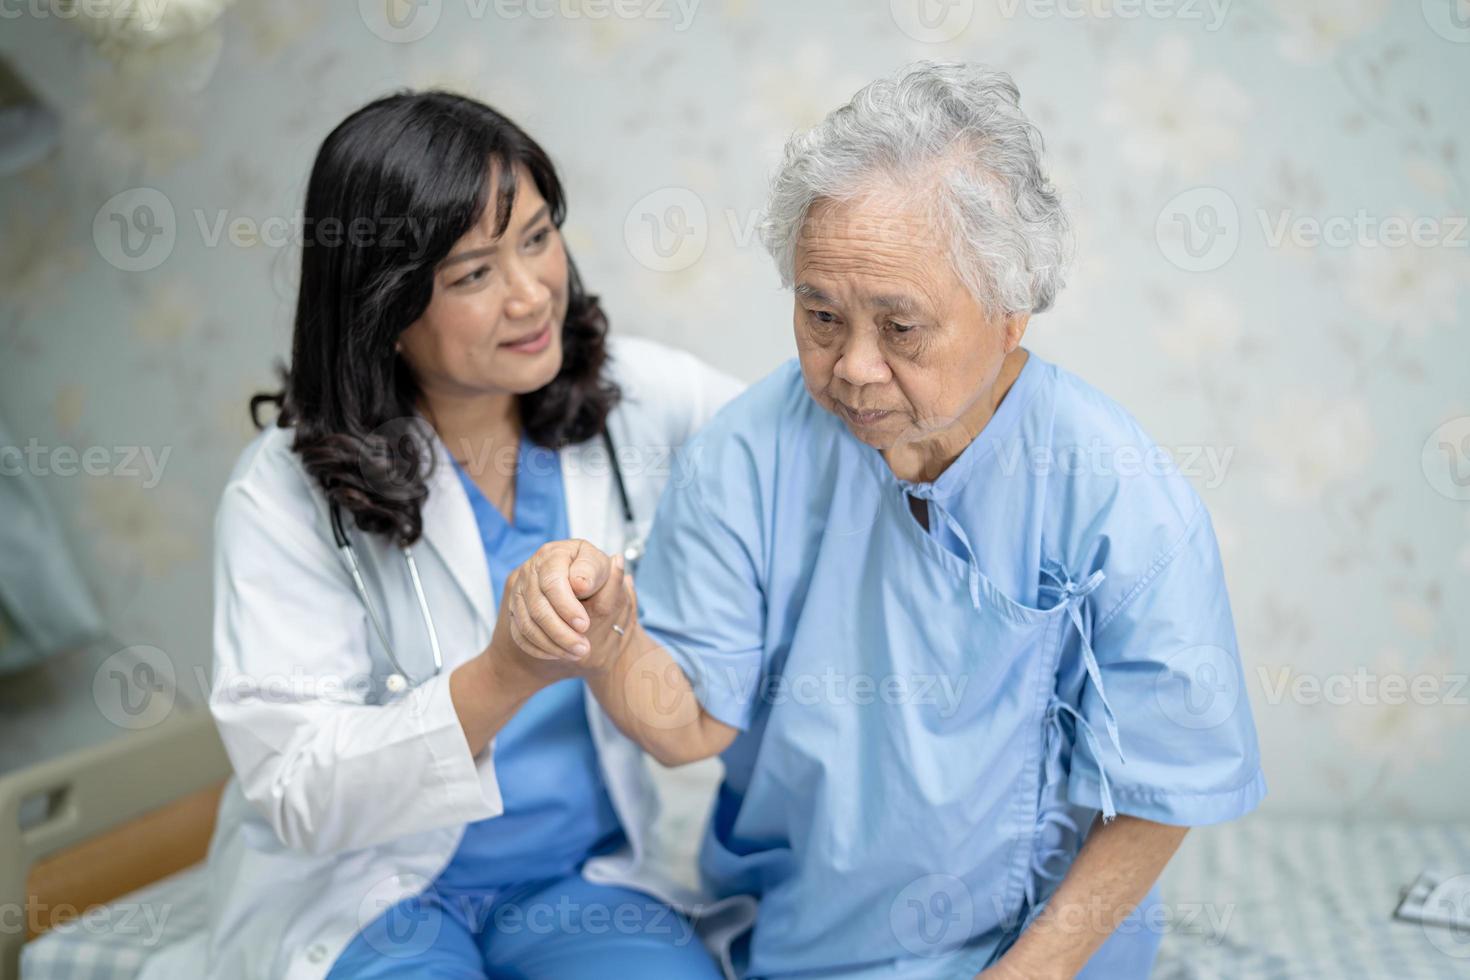 Touching  Asian senior or elderly old lady woman patient with love, care, helping, encourage and empathy at nursing hospital ward, healthy strong medical concept photo